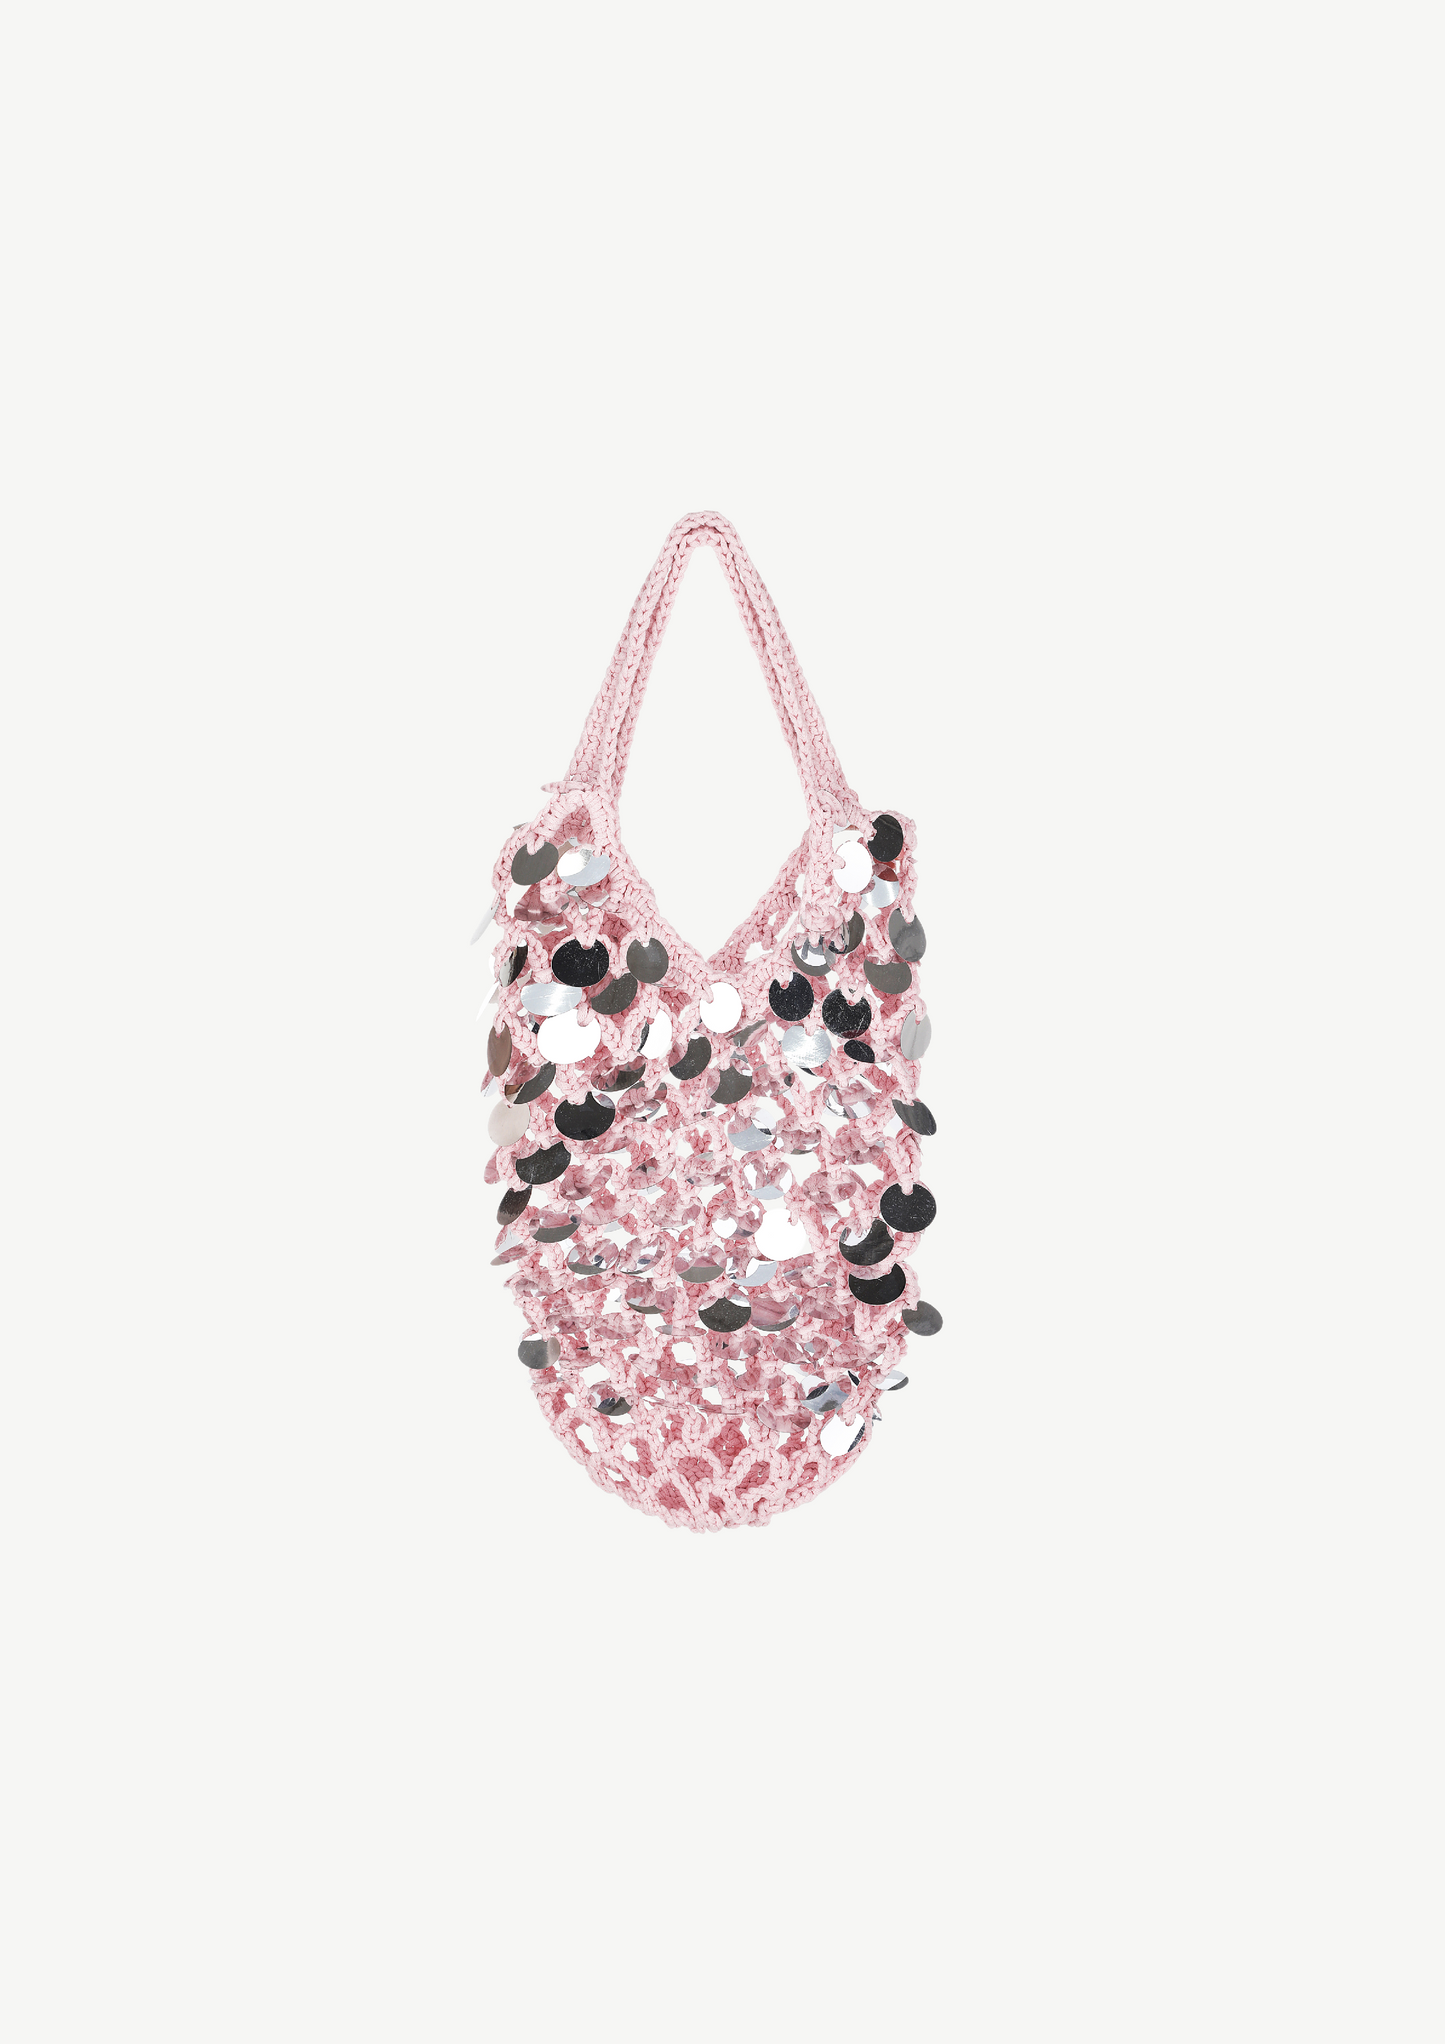 Knitted Bag With Sequins In Pink